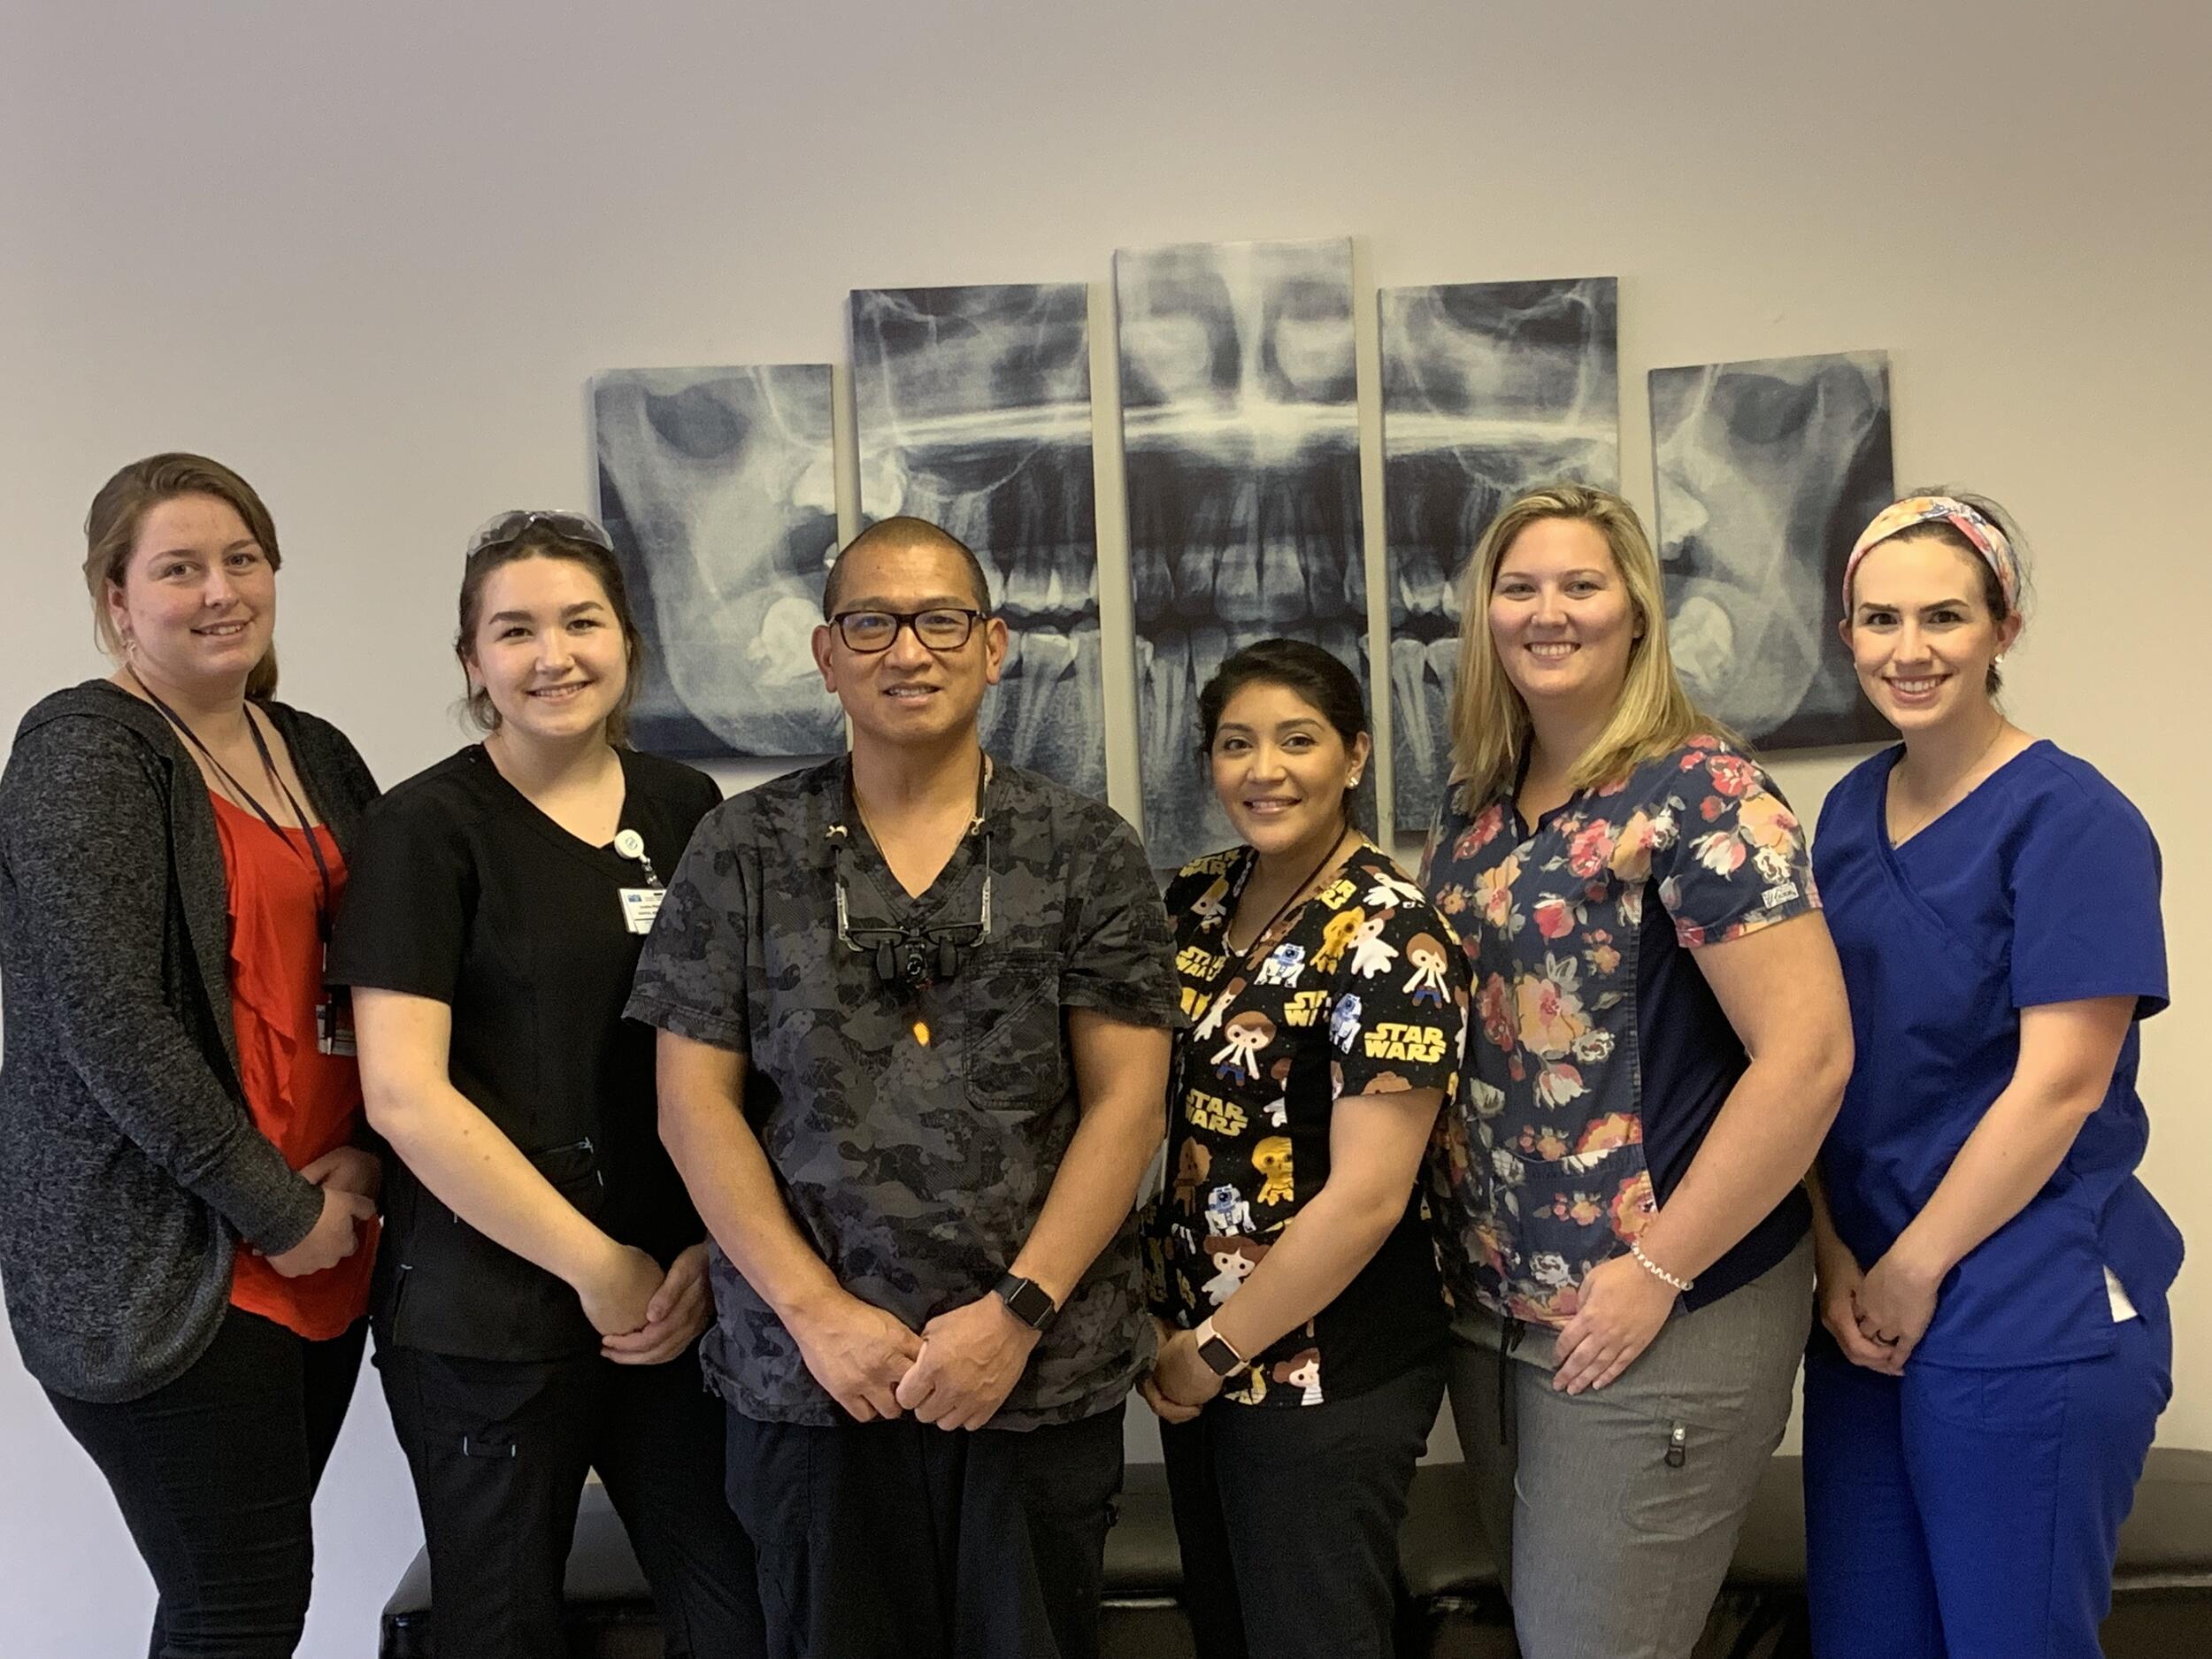 Sonny Duong stands with five of his dental practice colleagues.